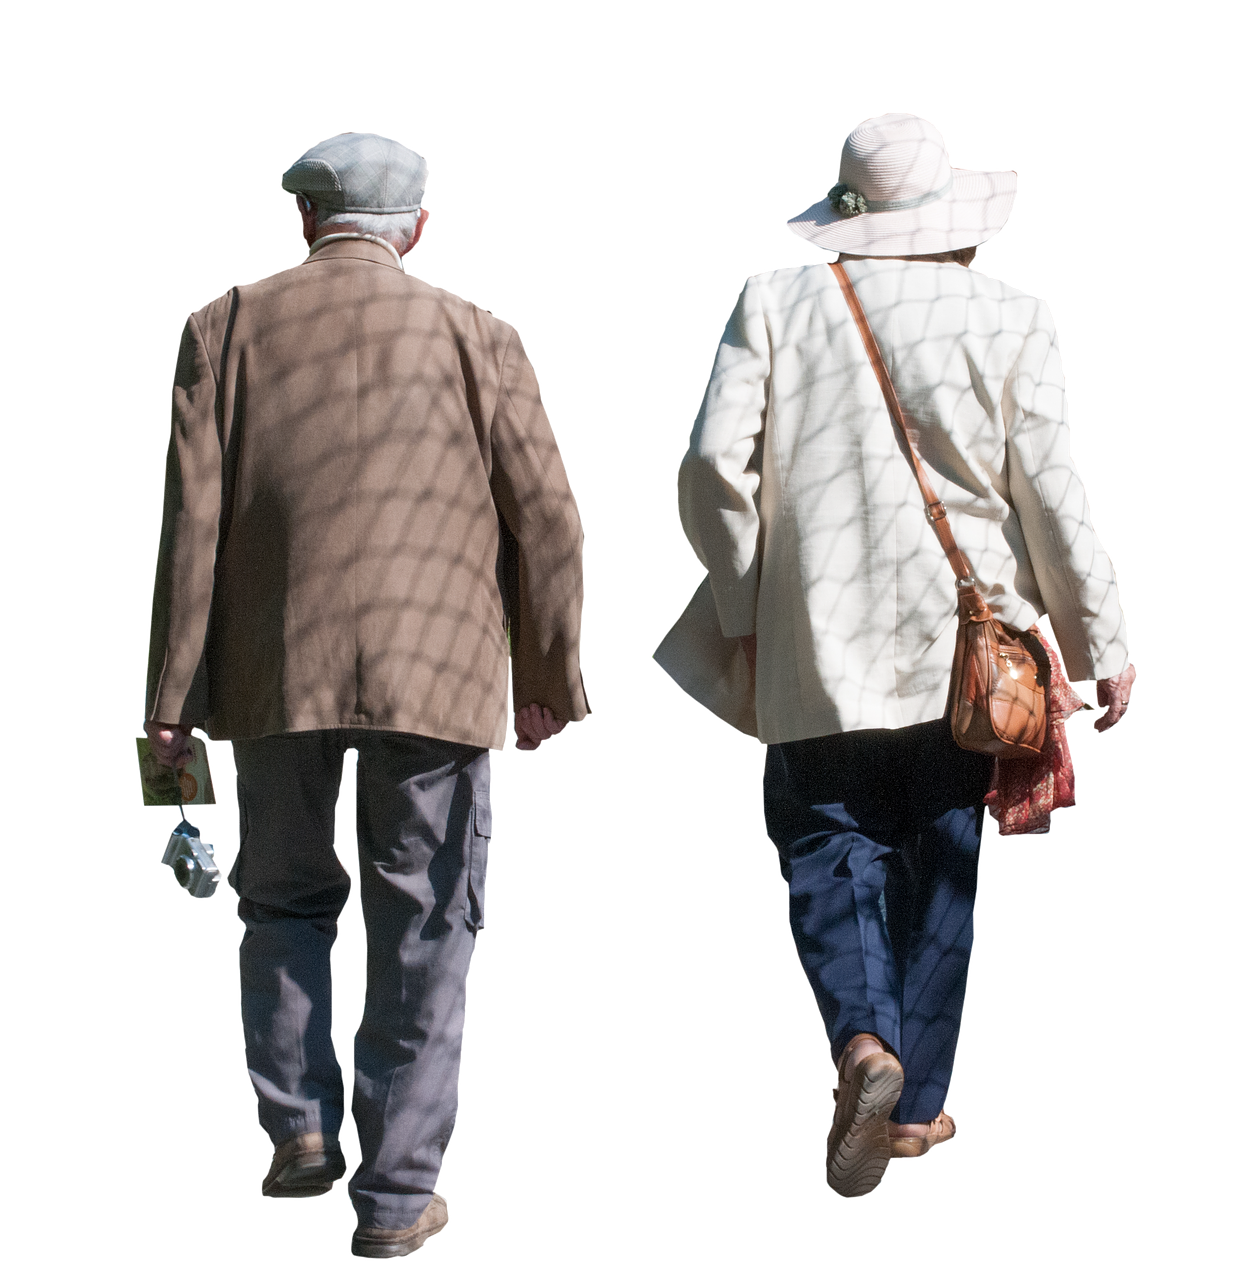 old, pensioners, isolated-2742052.jpg